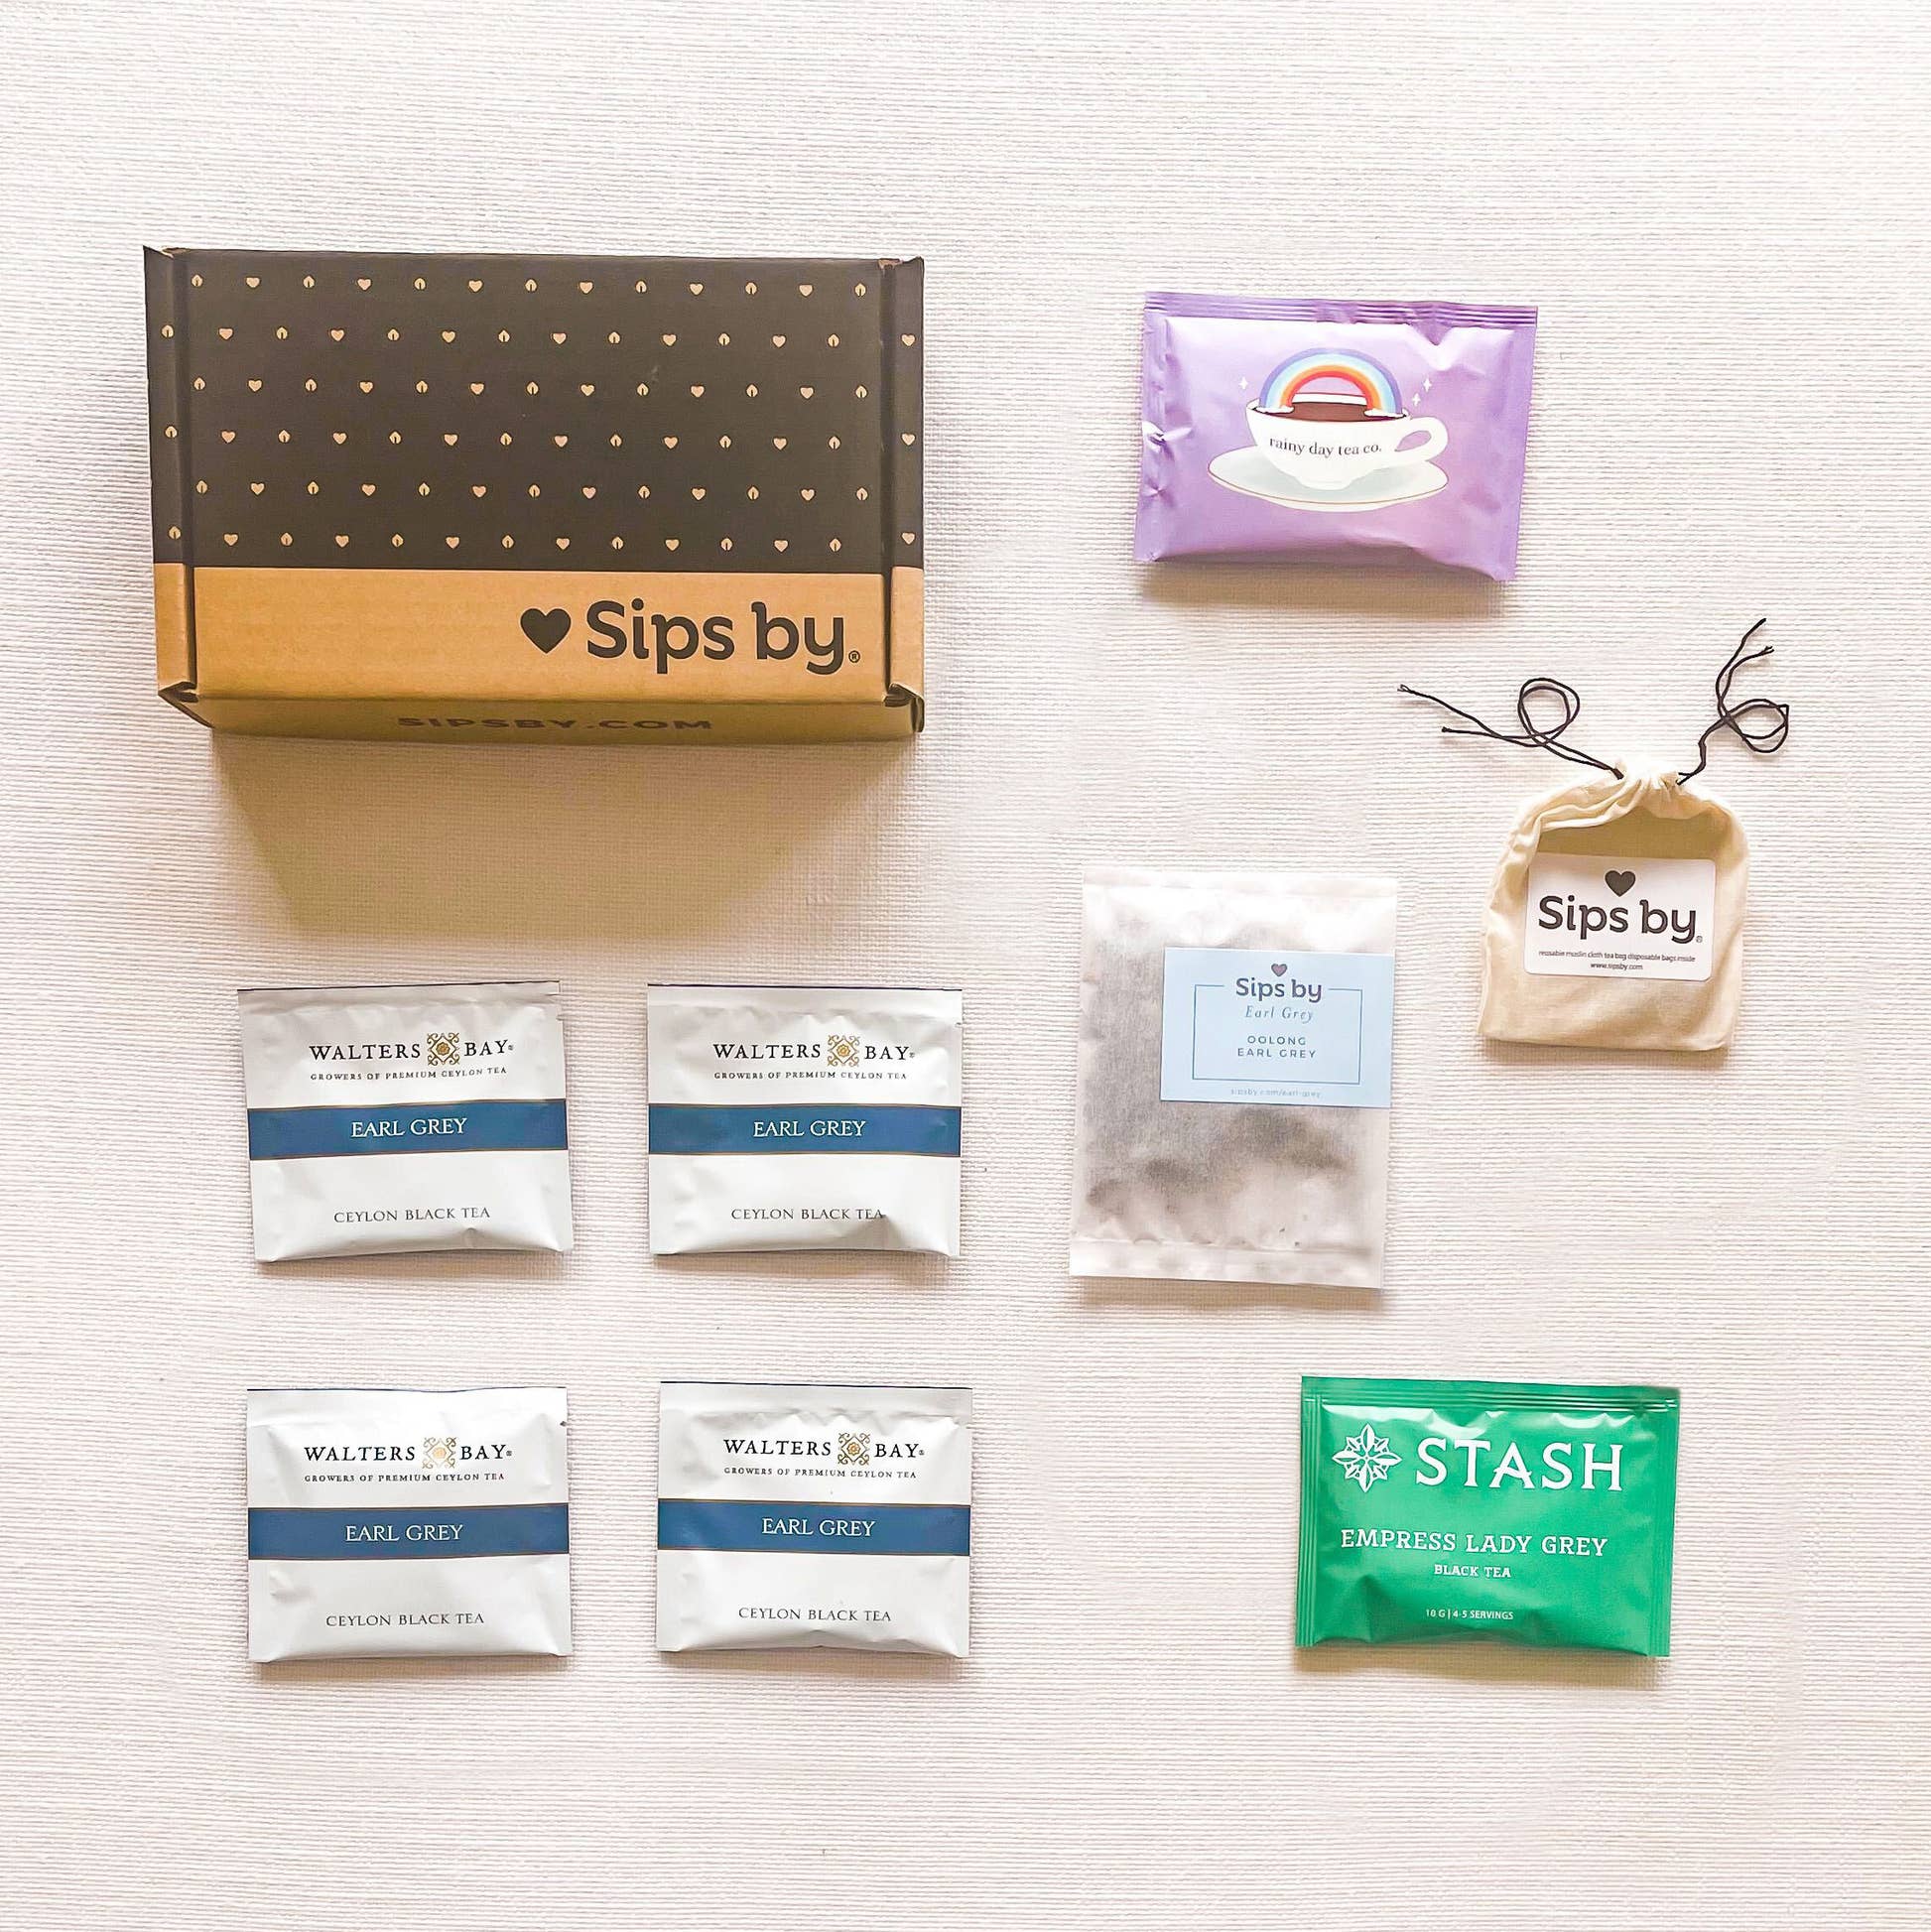 Sips by box with four different earl grey tea samples from Walters Bay, Stash Tea, Sips by Earl Grey, and Rainy Day Tea Co with pouch of biodegradable tea filters